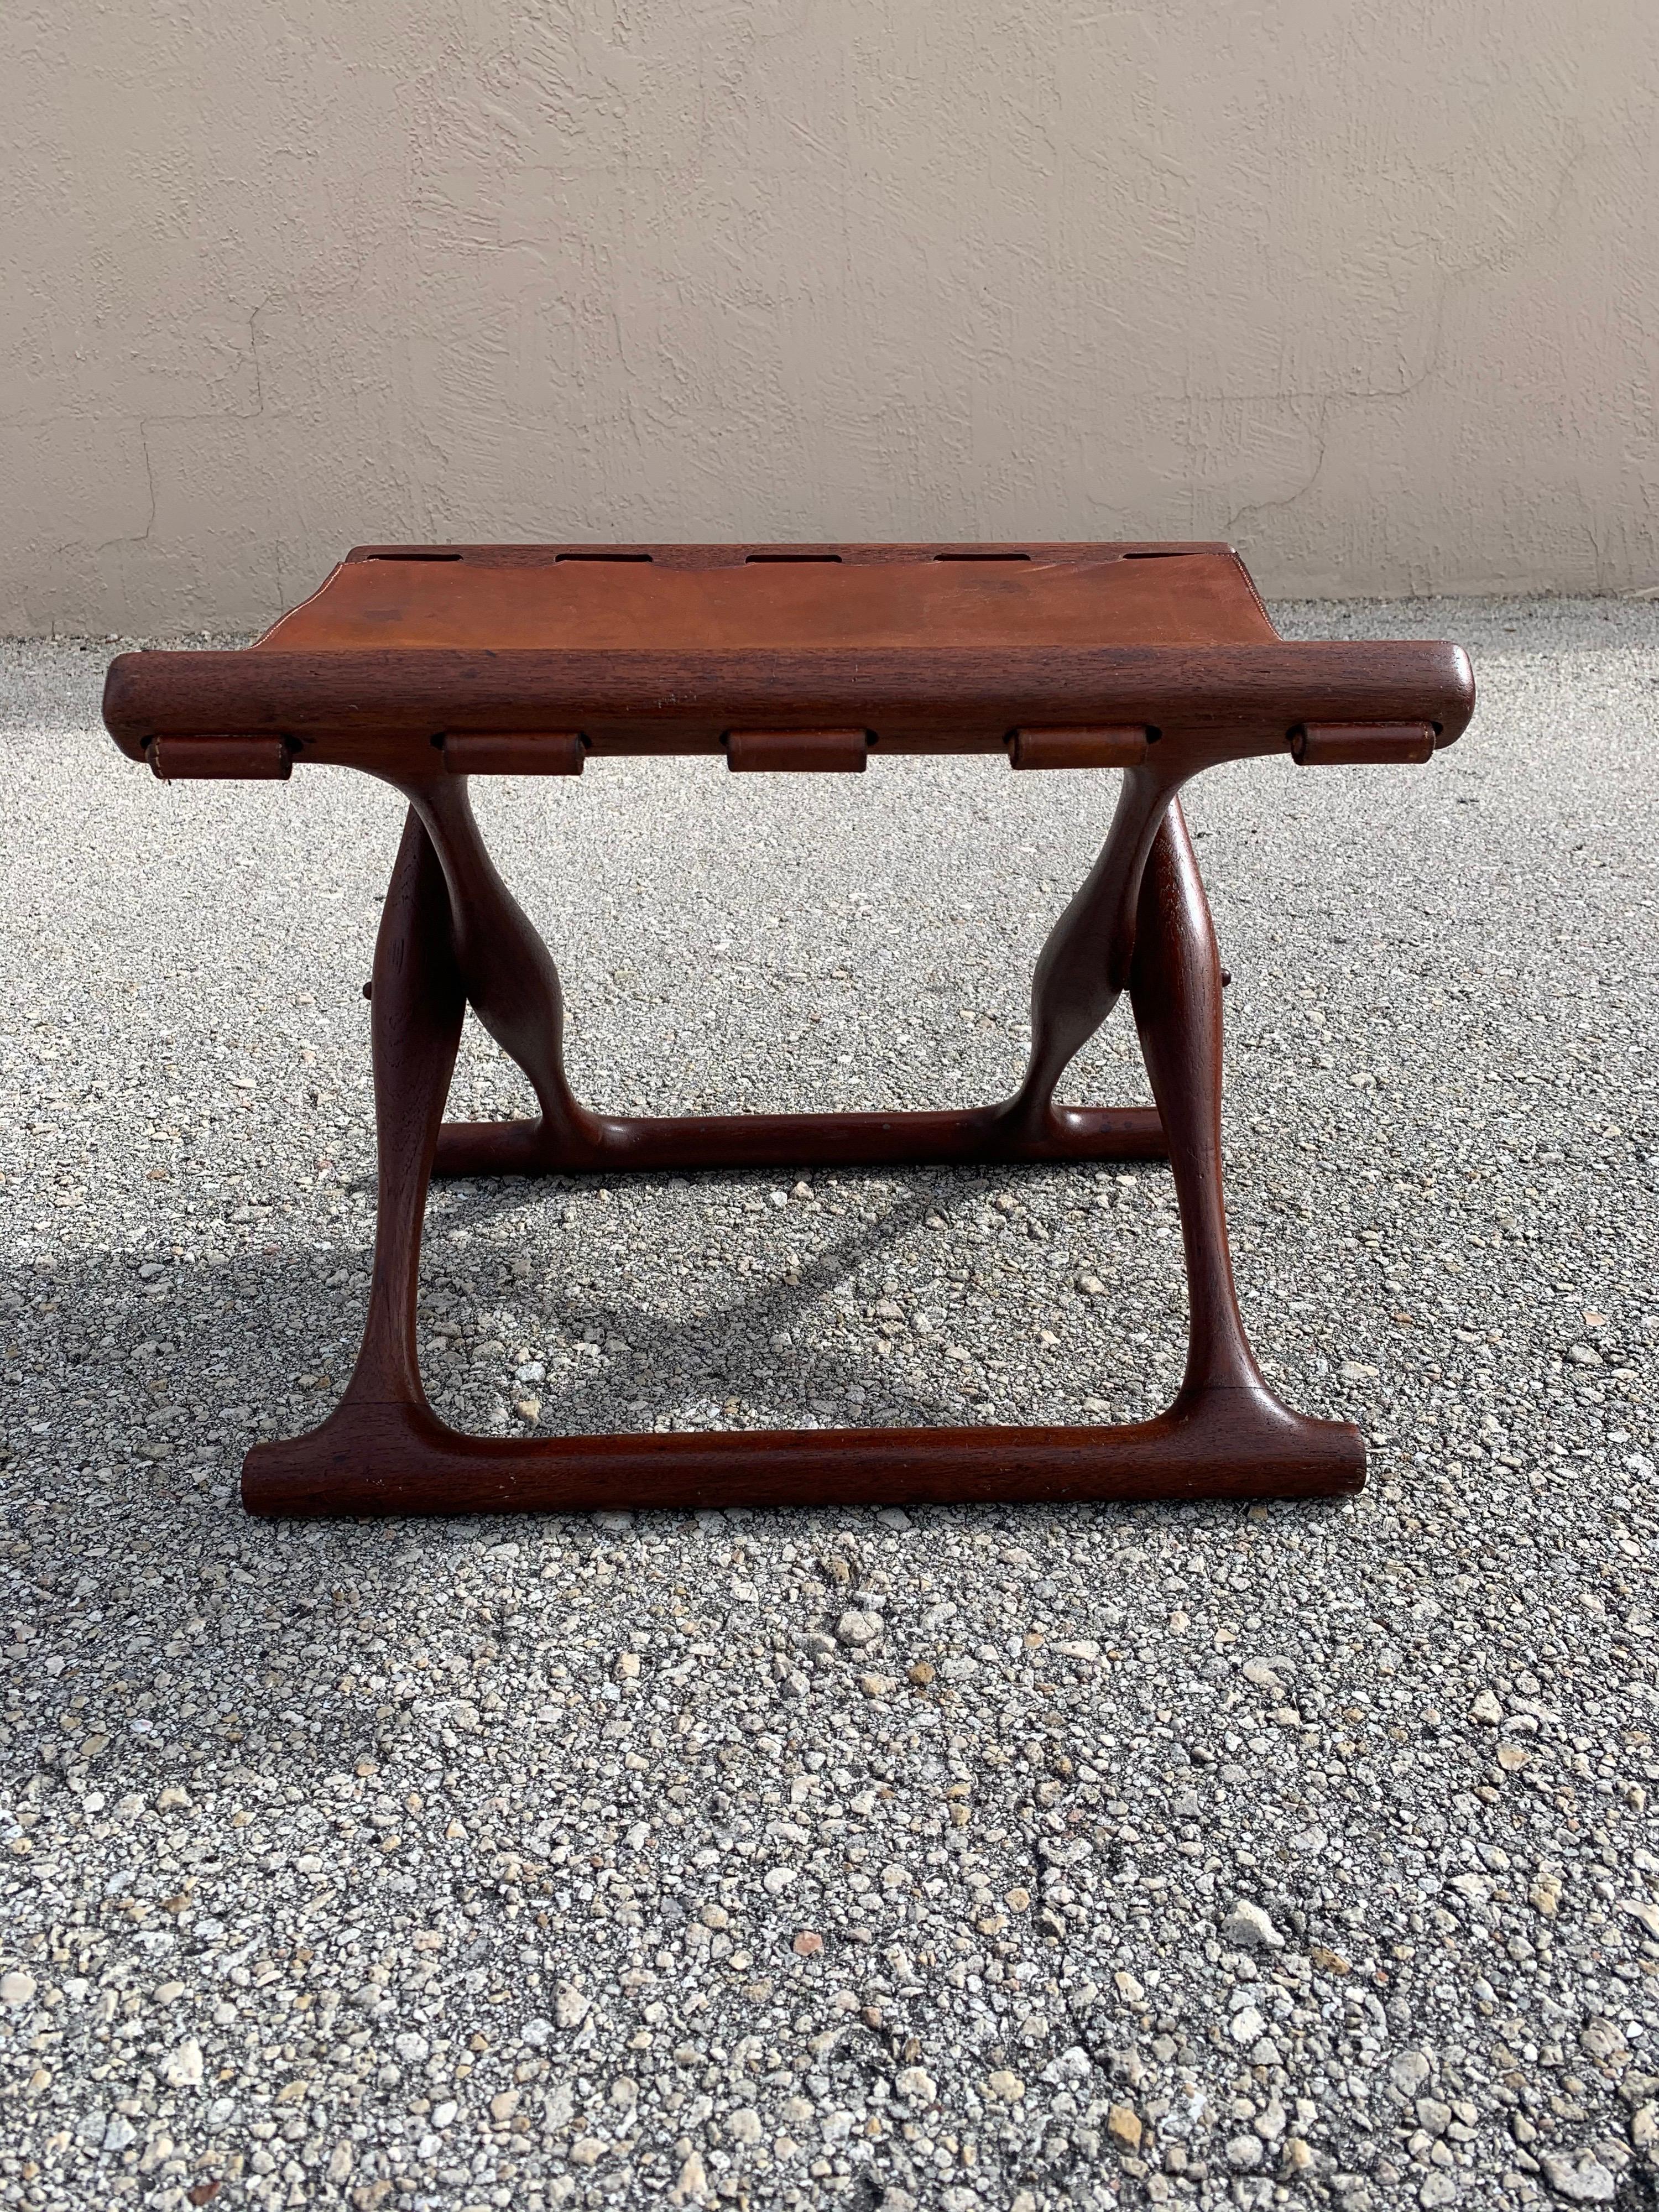 Danish teak folding stool designed by Poul Hundevad. In original condition. Simple, elegant and natural design. Great patina in the finish and leather. No damage. Would fit well in Mid Century Modern, minimalist, and natural themed rooms.